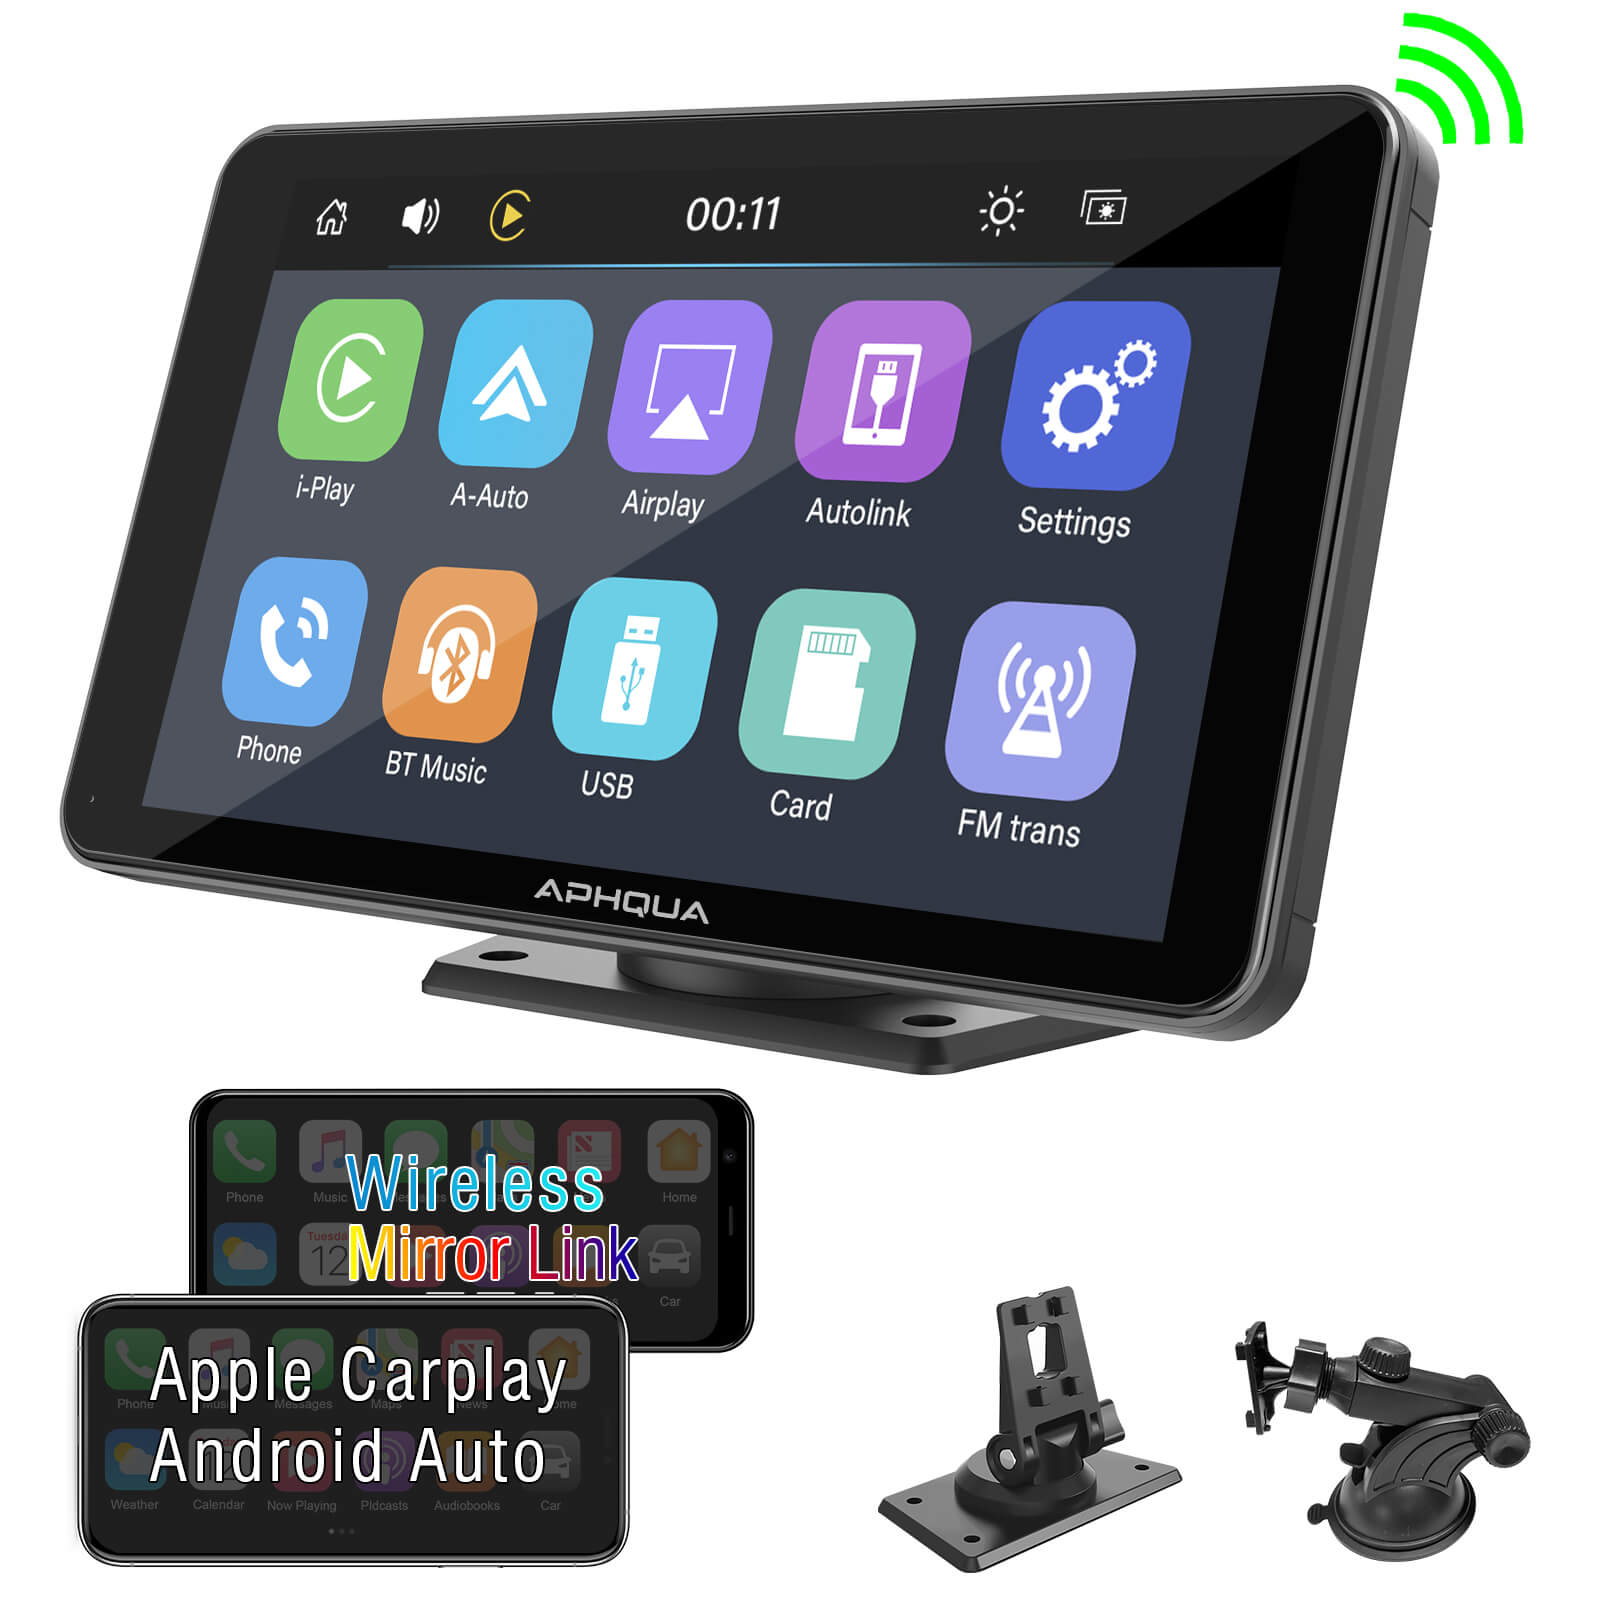  10 Inch Wireless Apple Carplay & Android Auto Car Stereo,  Touchscreen Car Play Screen GPS Navigation for Car, Car Radio Receiver for  Pickup Trucks, Bluetooth, Siri, Multimedia Player, FM Transmitter 